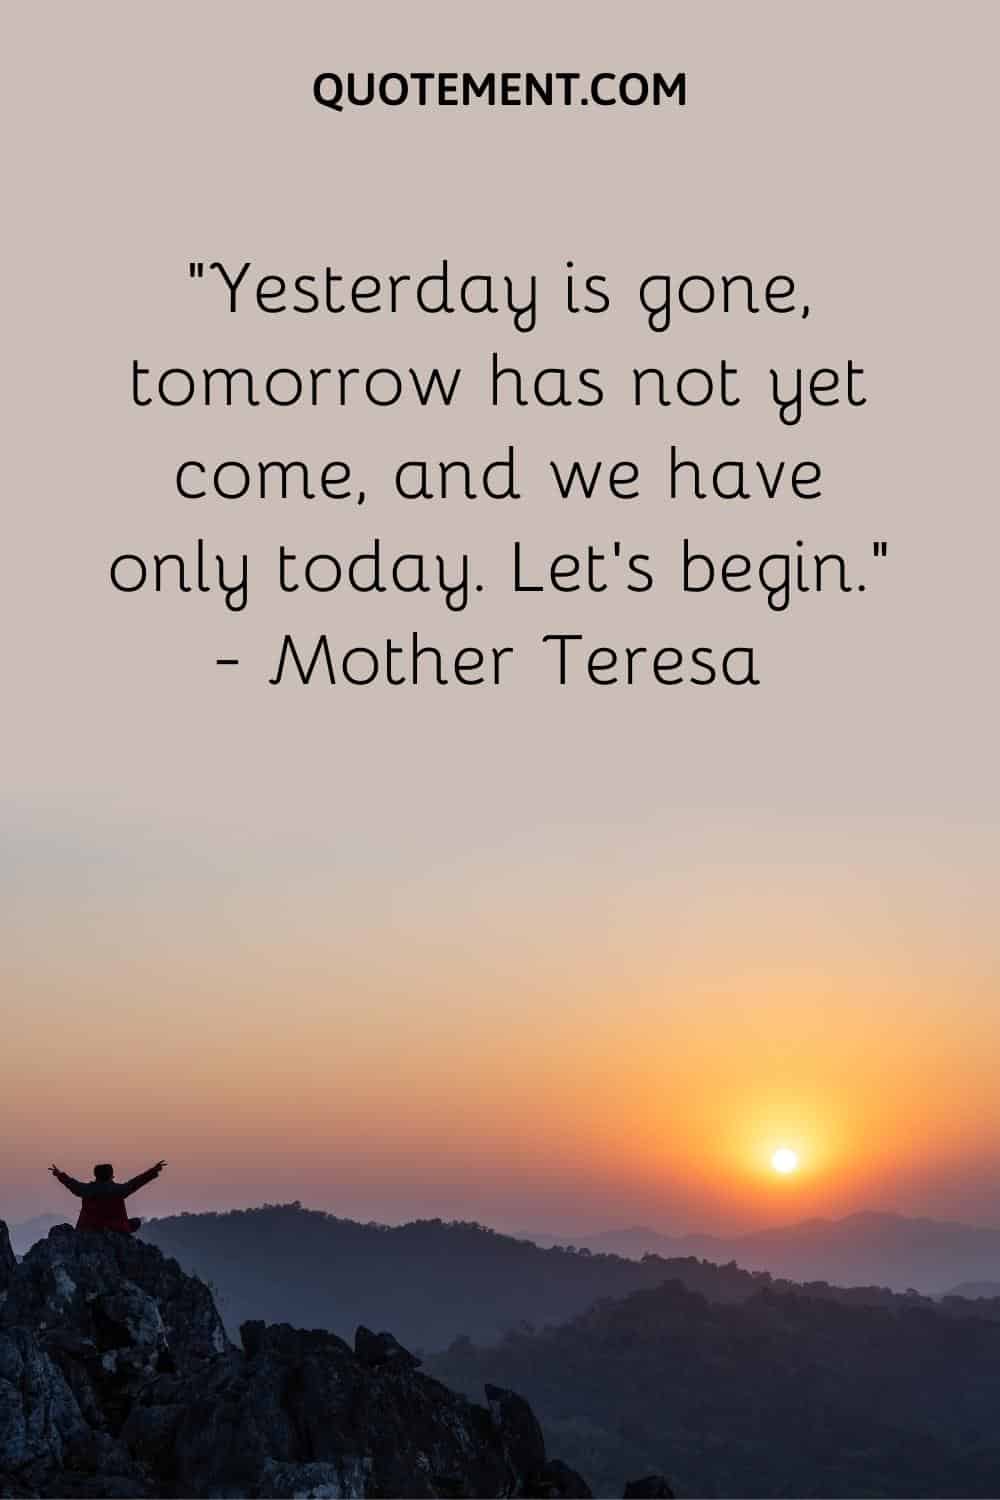 Yesterday is gone, tomorrow has not yet come, and we have only today